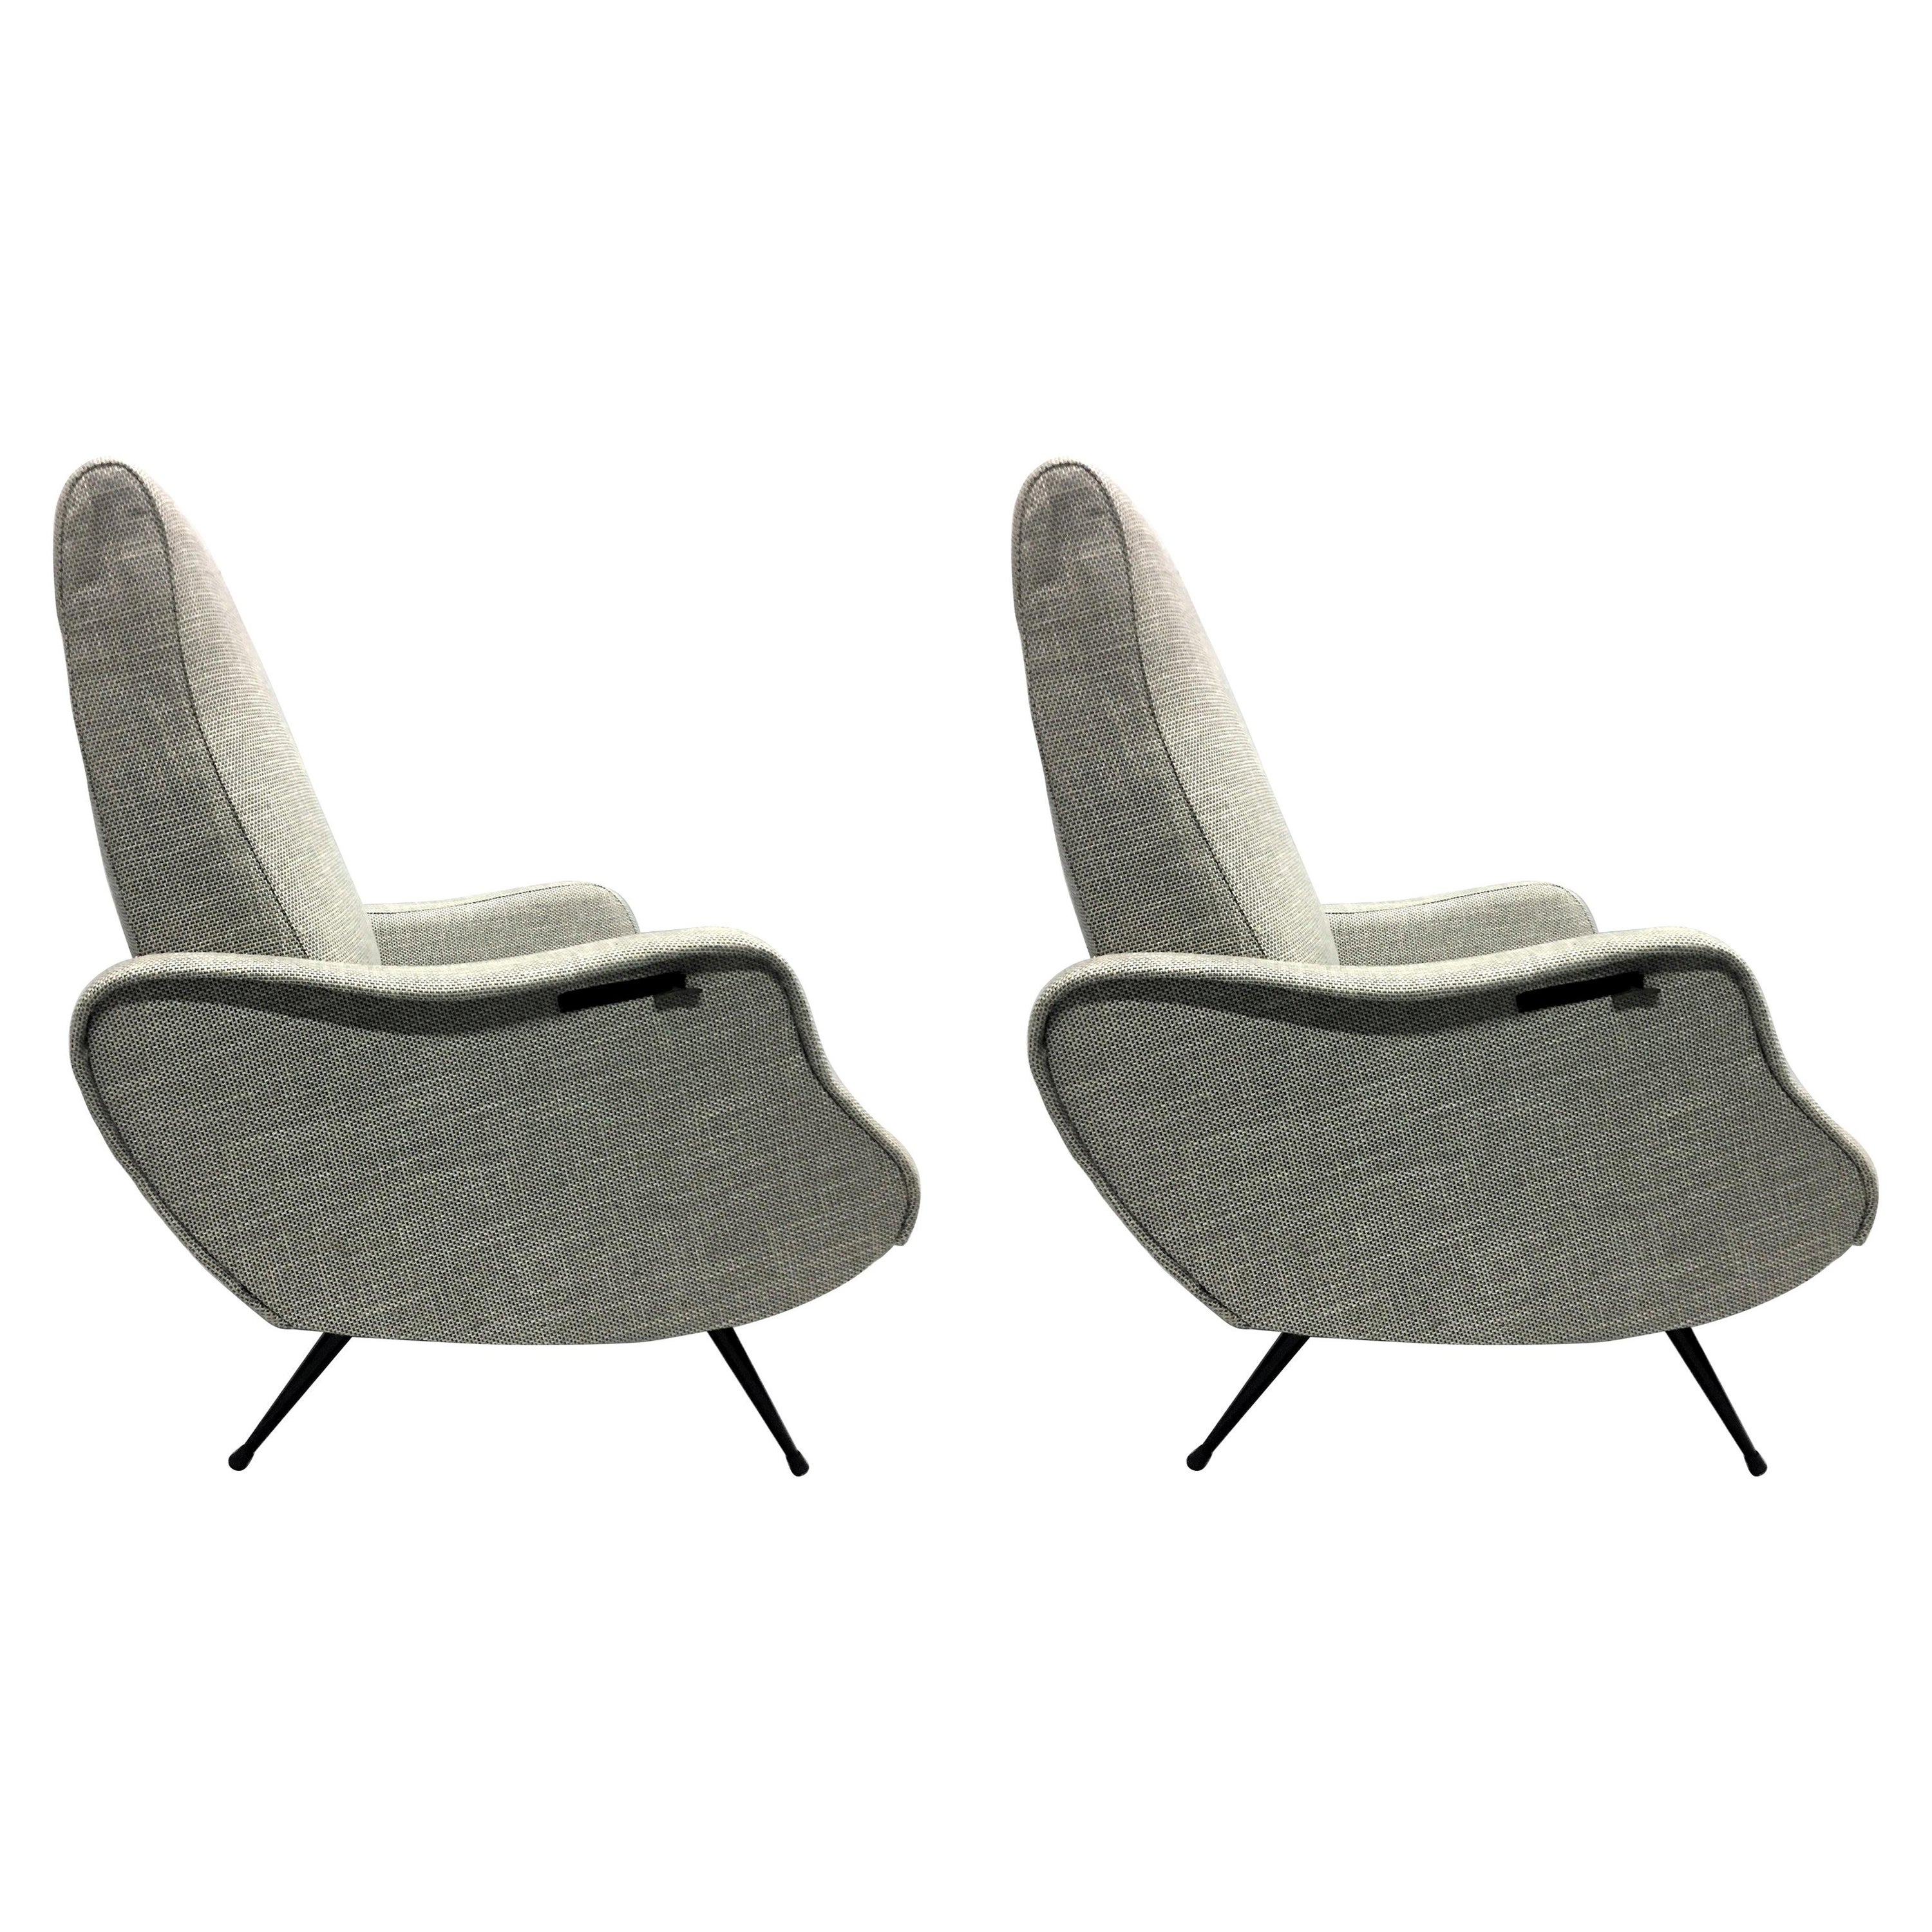 Pair of Mid-Century Modern Lounge Chairs/ Recliners Style Marco Zanuso, Italy